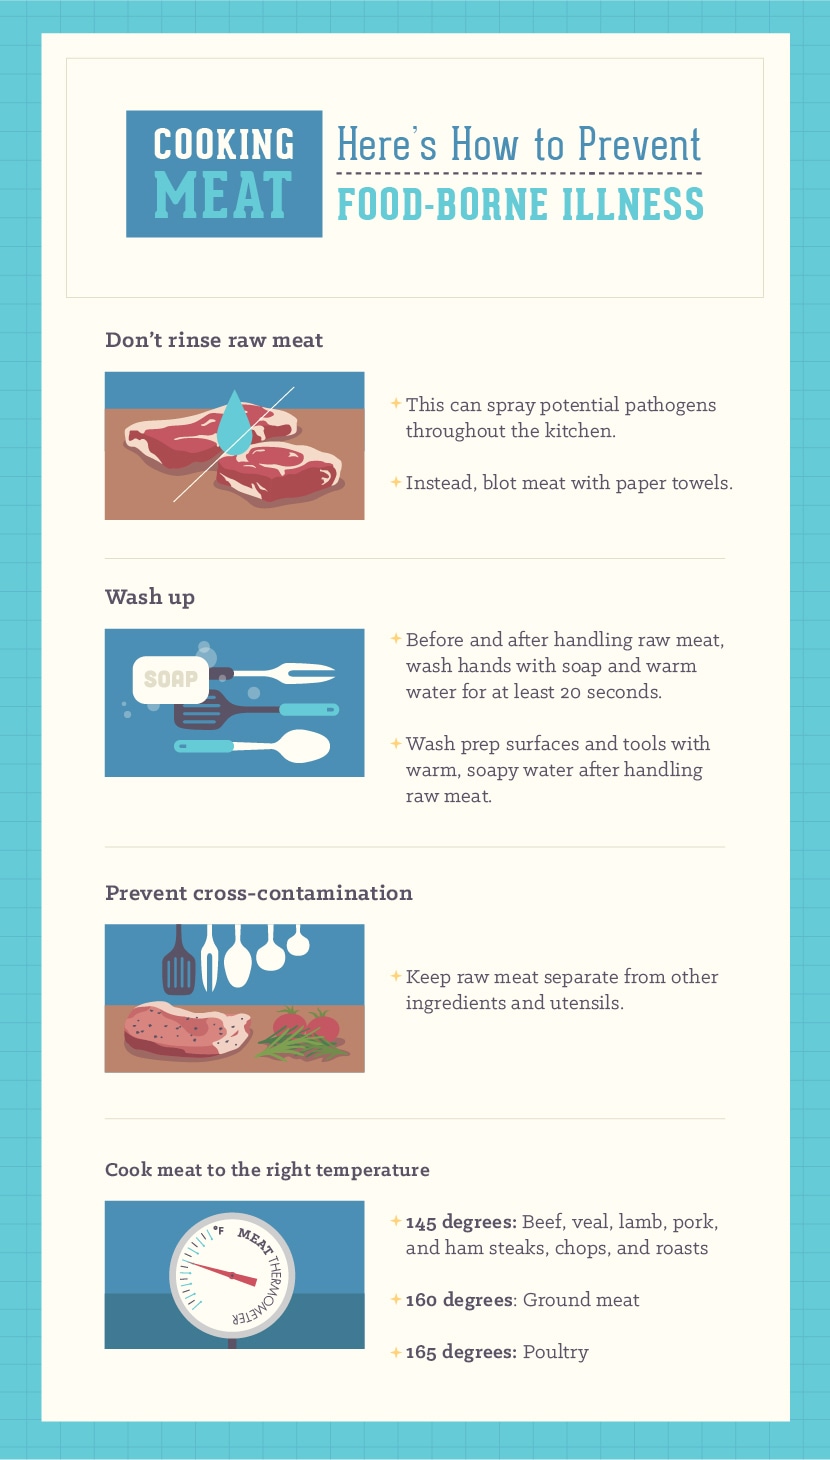 Preventing Food Borne Illness - How to Cook Meat Properly